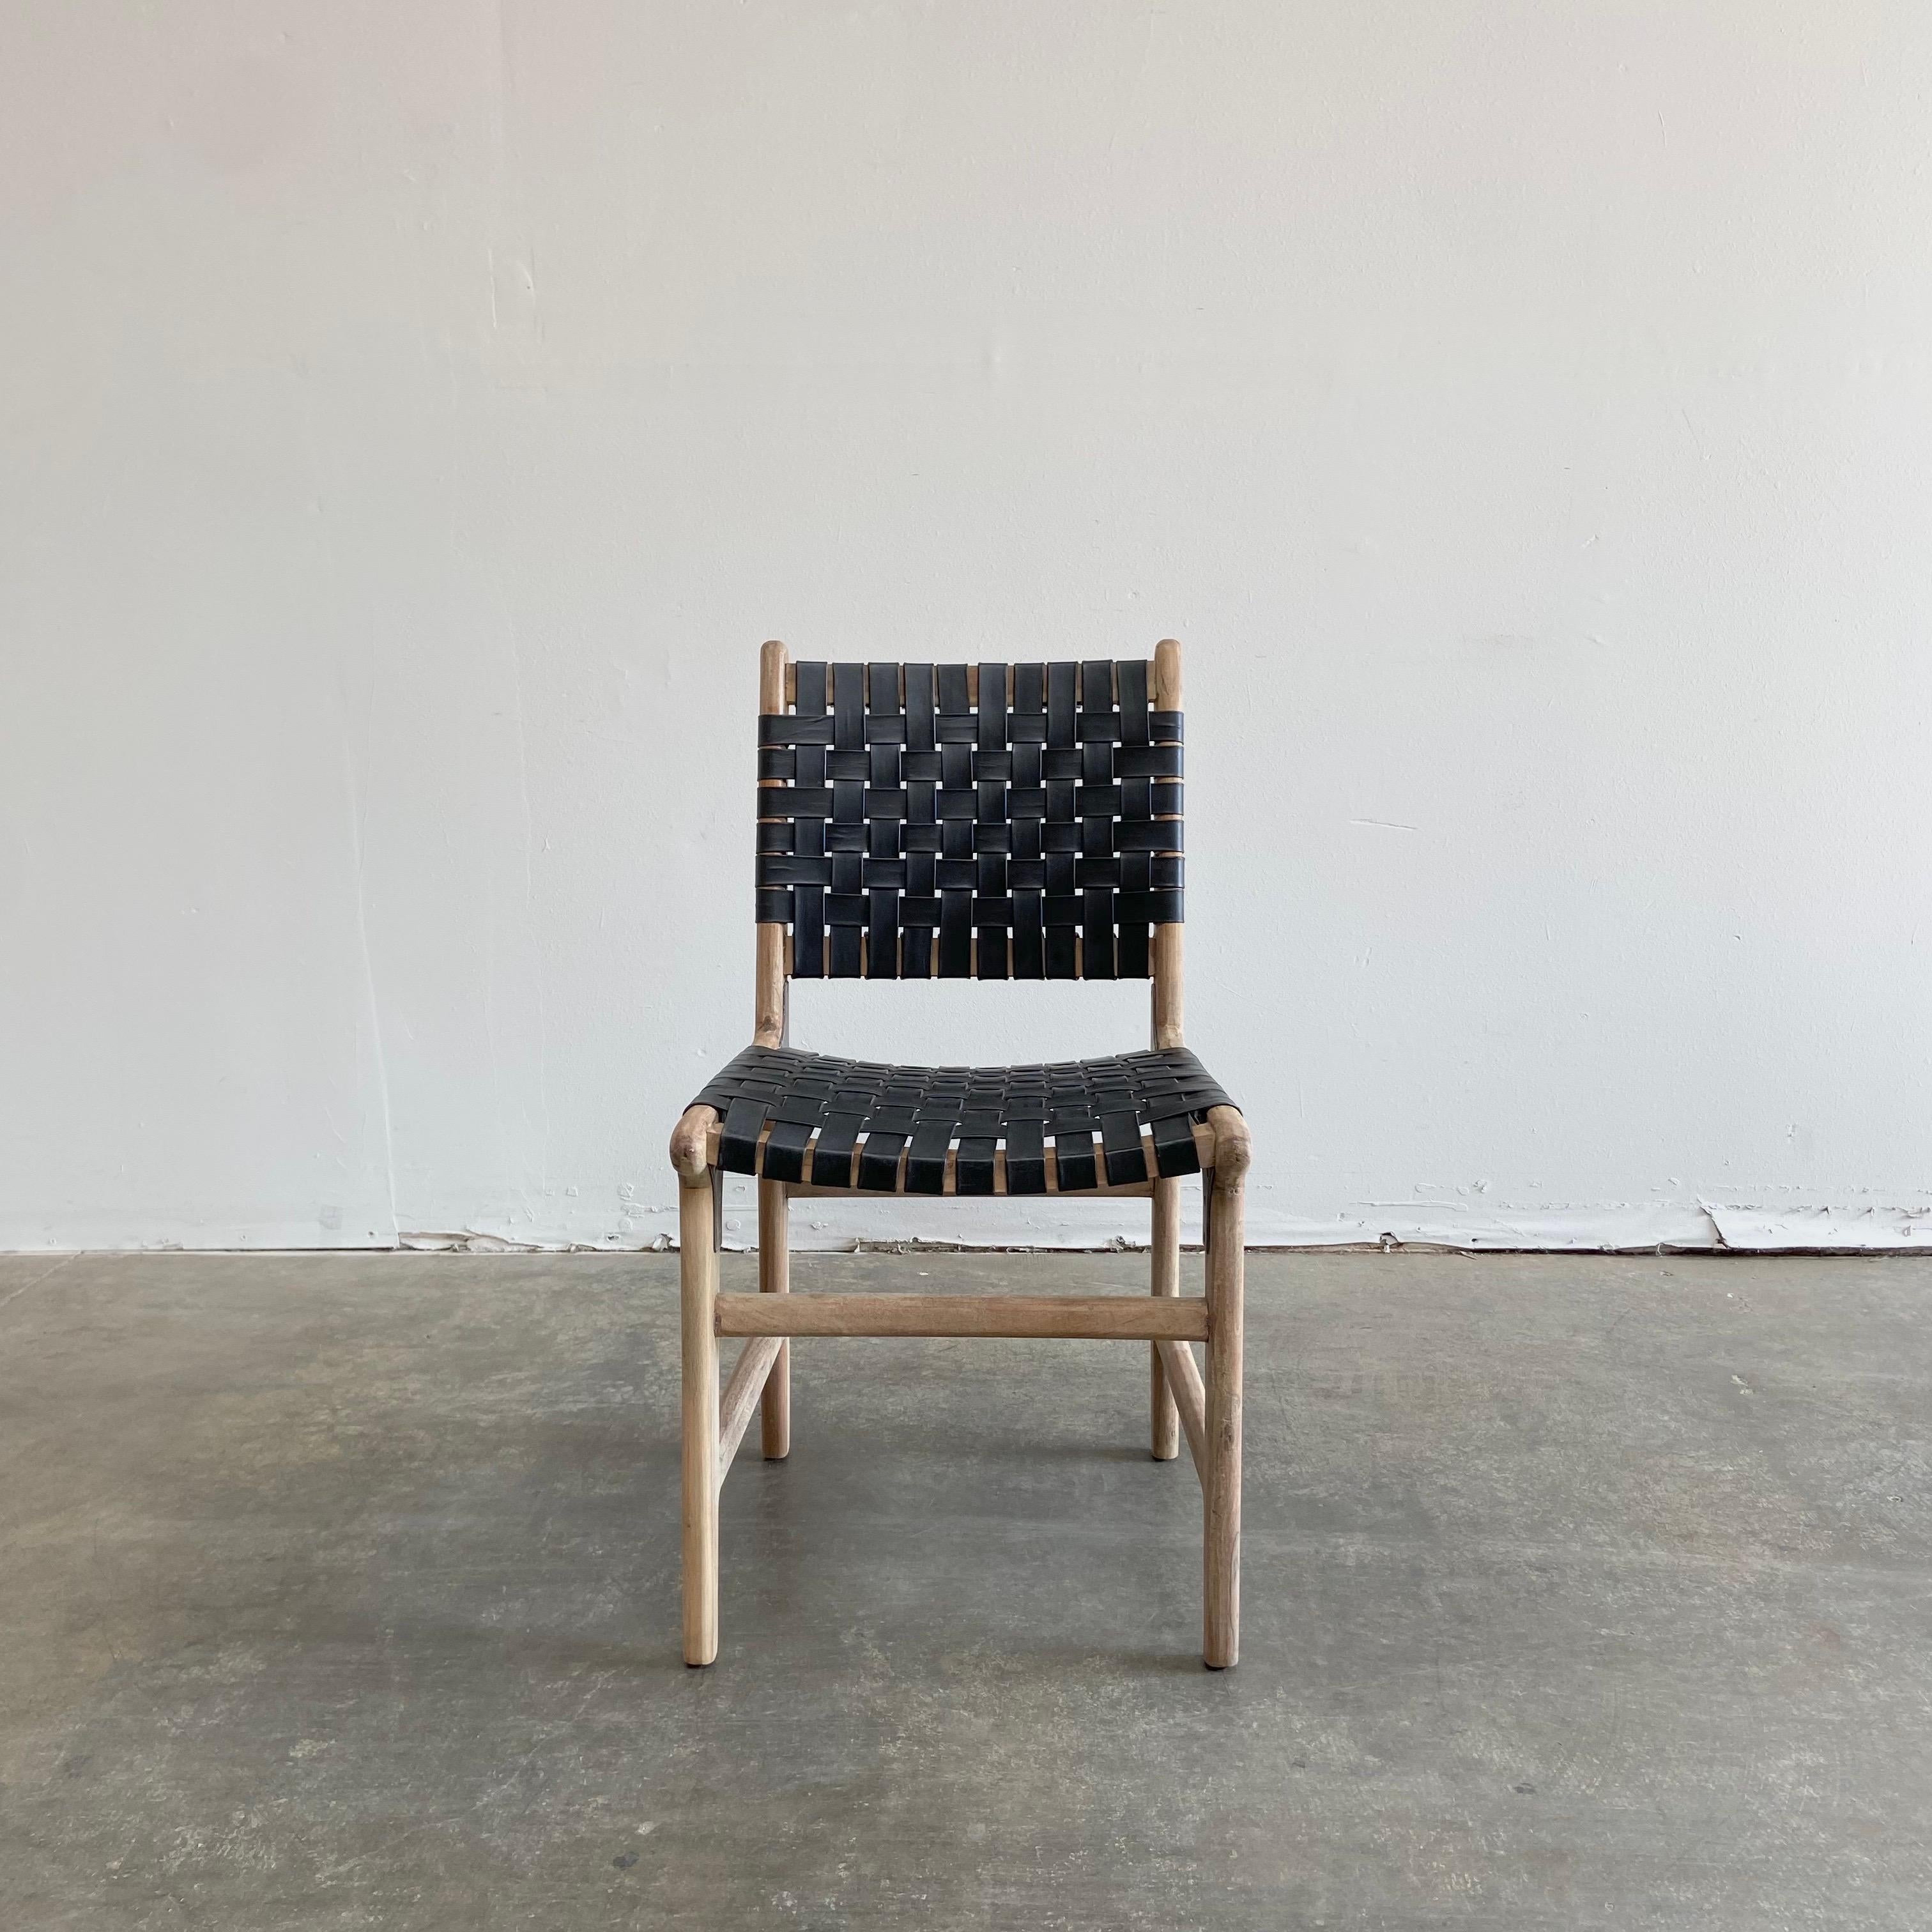 Contemporary Teak Wood and Black Vintage Leather Woven Strap Dining Chairs For Sale